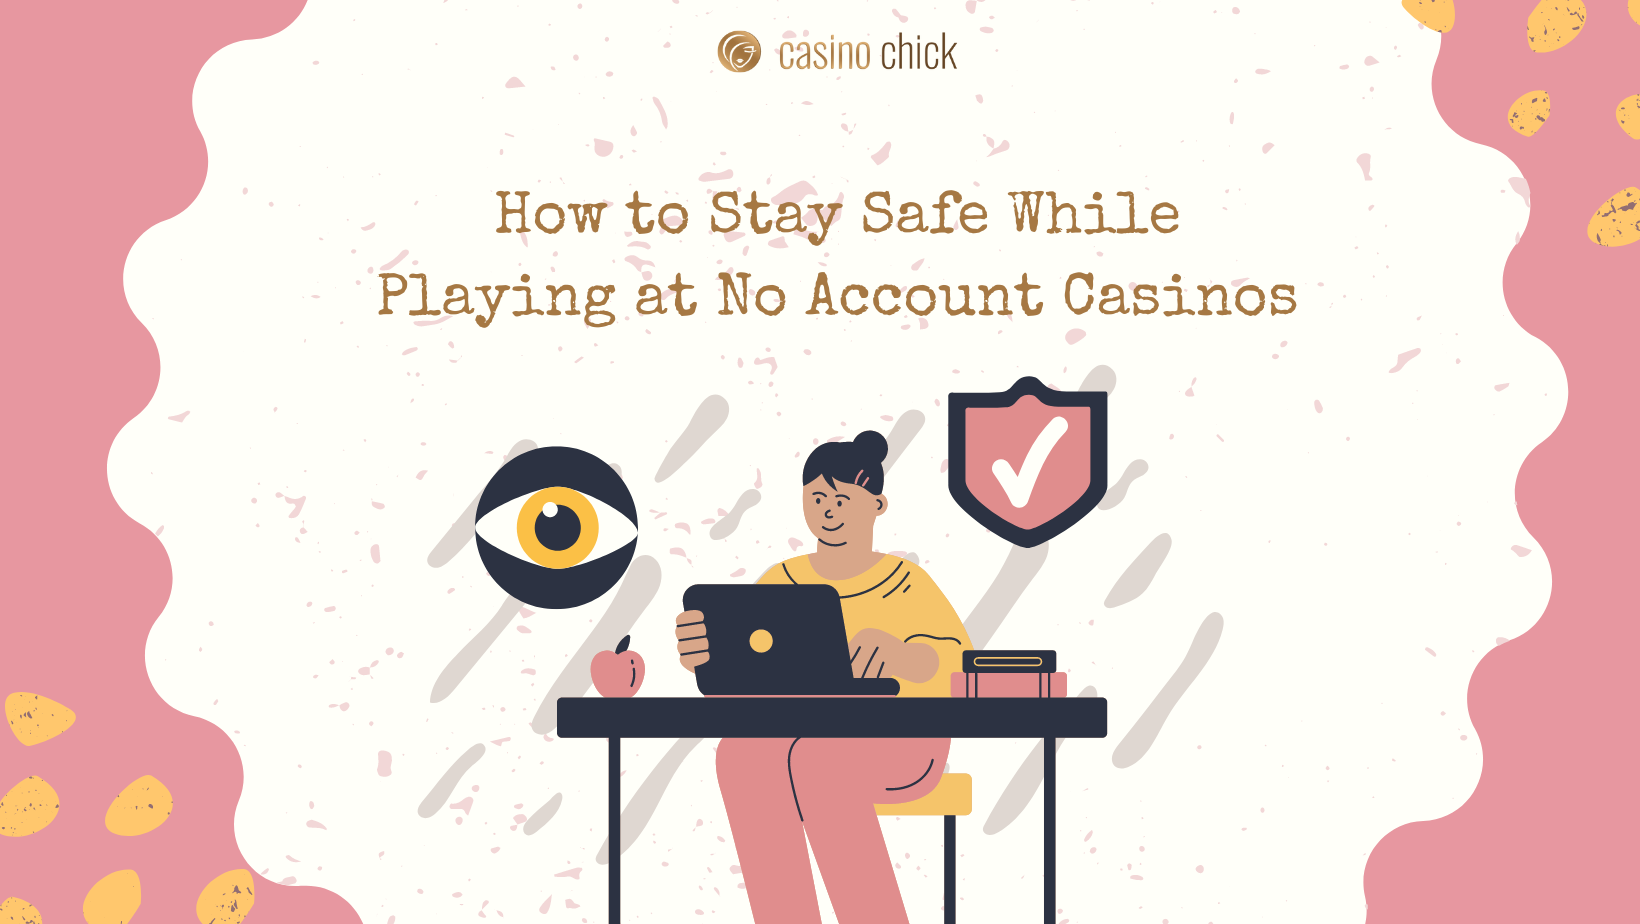 How to Stay Safe While Playing at No Account Casinos